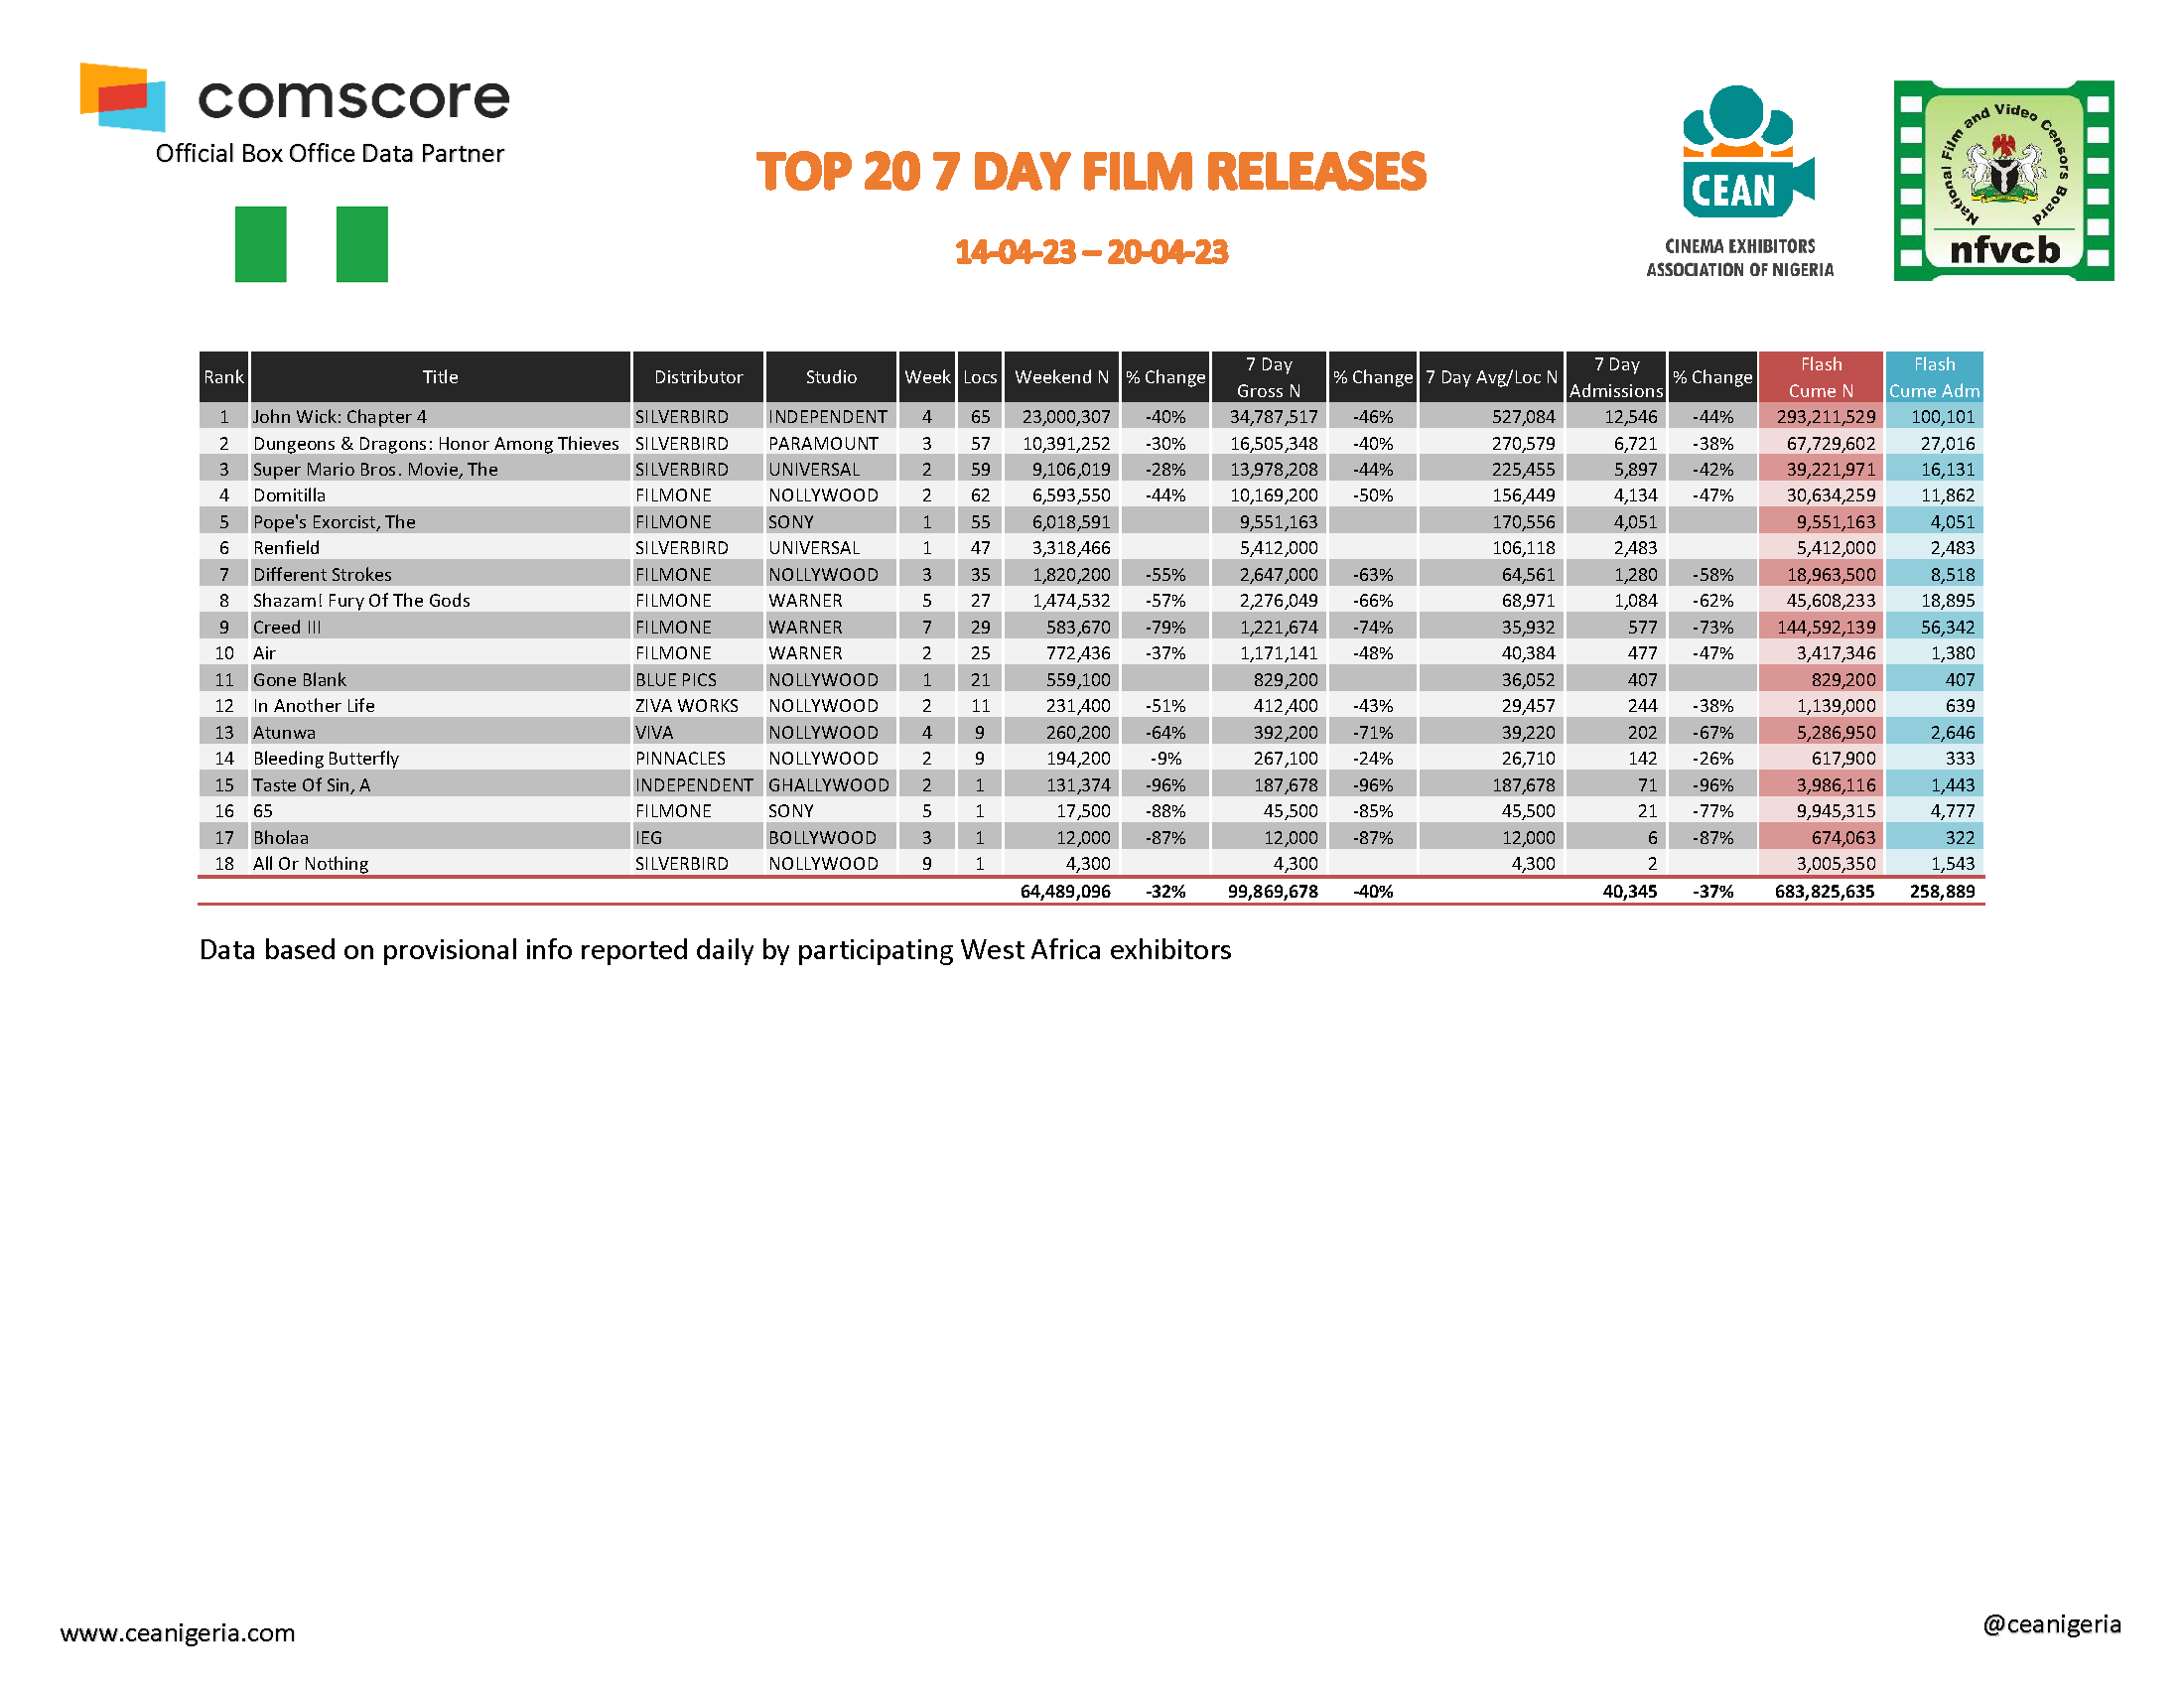 Top 20 films 7 Day 14th 20th April